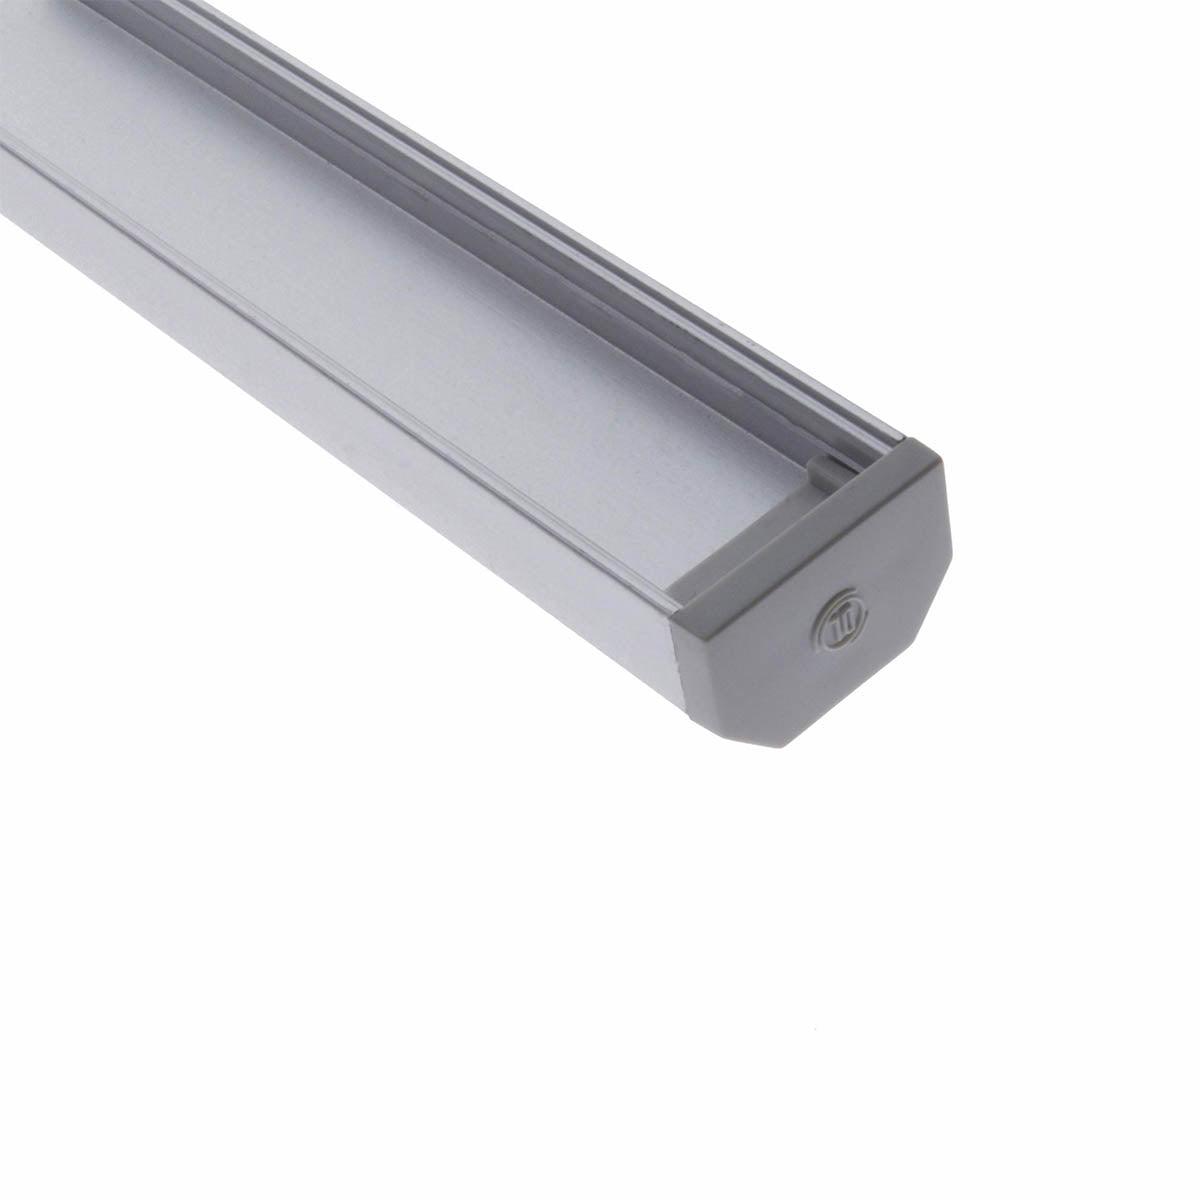 Chromapath Single End Cap Pair for Square Channels, Aluminum - Bees Lighting